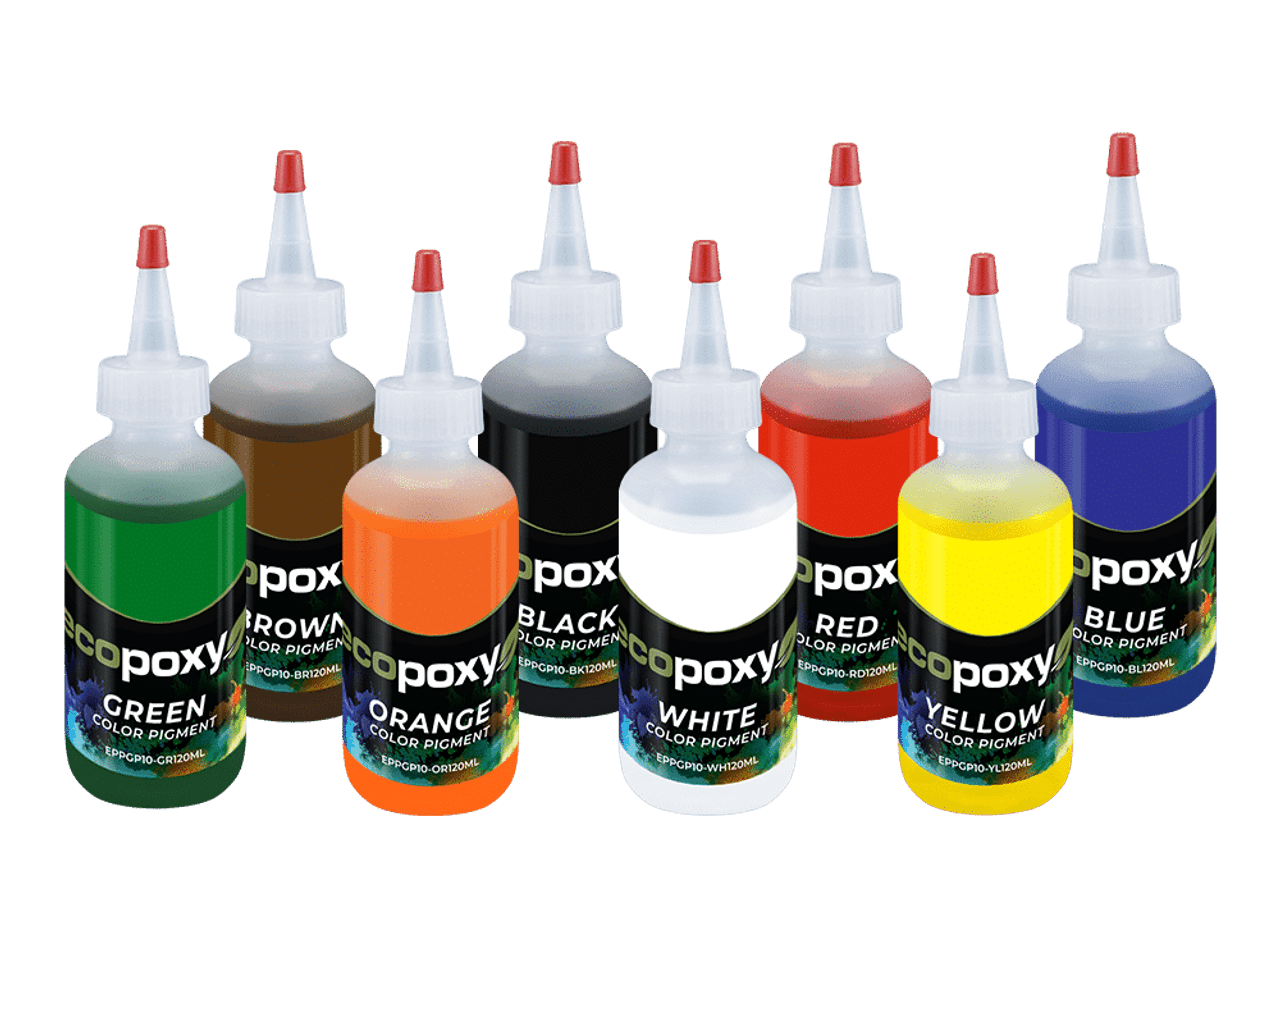 They are used to tint epoxy resins used as coatings, paints, gelcoats, laminating, casting or self-leveling resins.